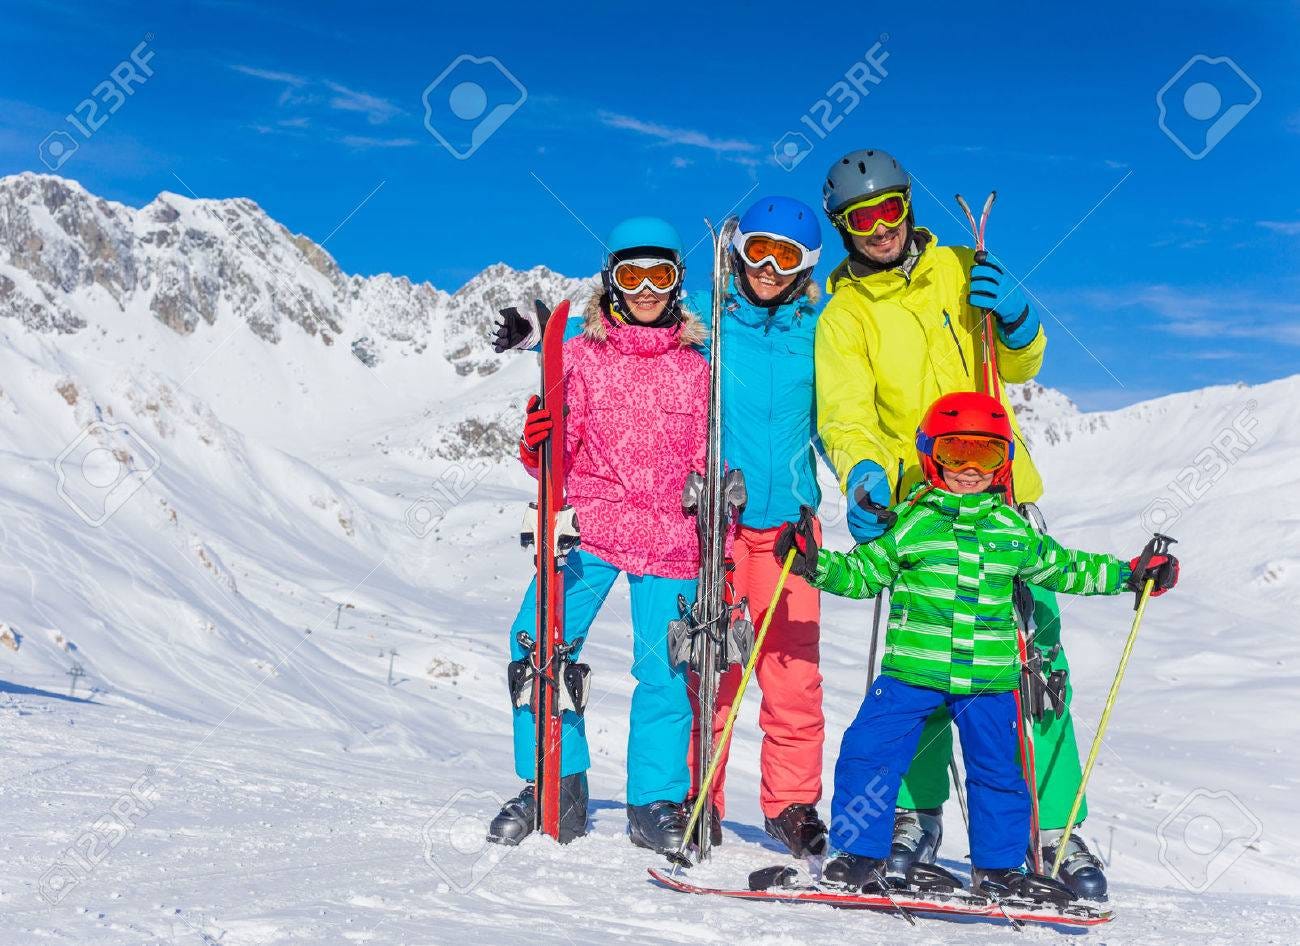 Winter Fun, Skiing - Happy Family Ski Team Stock Photo, Picture and Royalty  Free Image. Image 49758241.